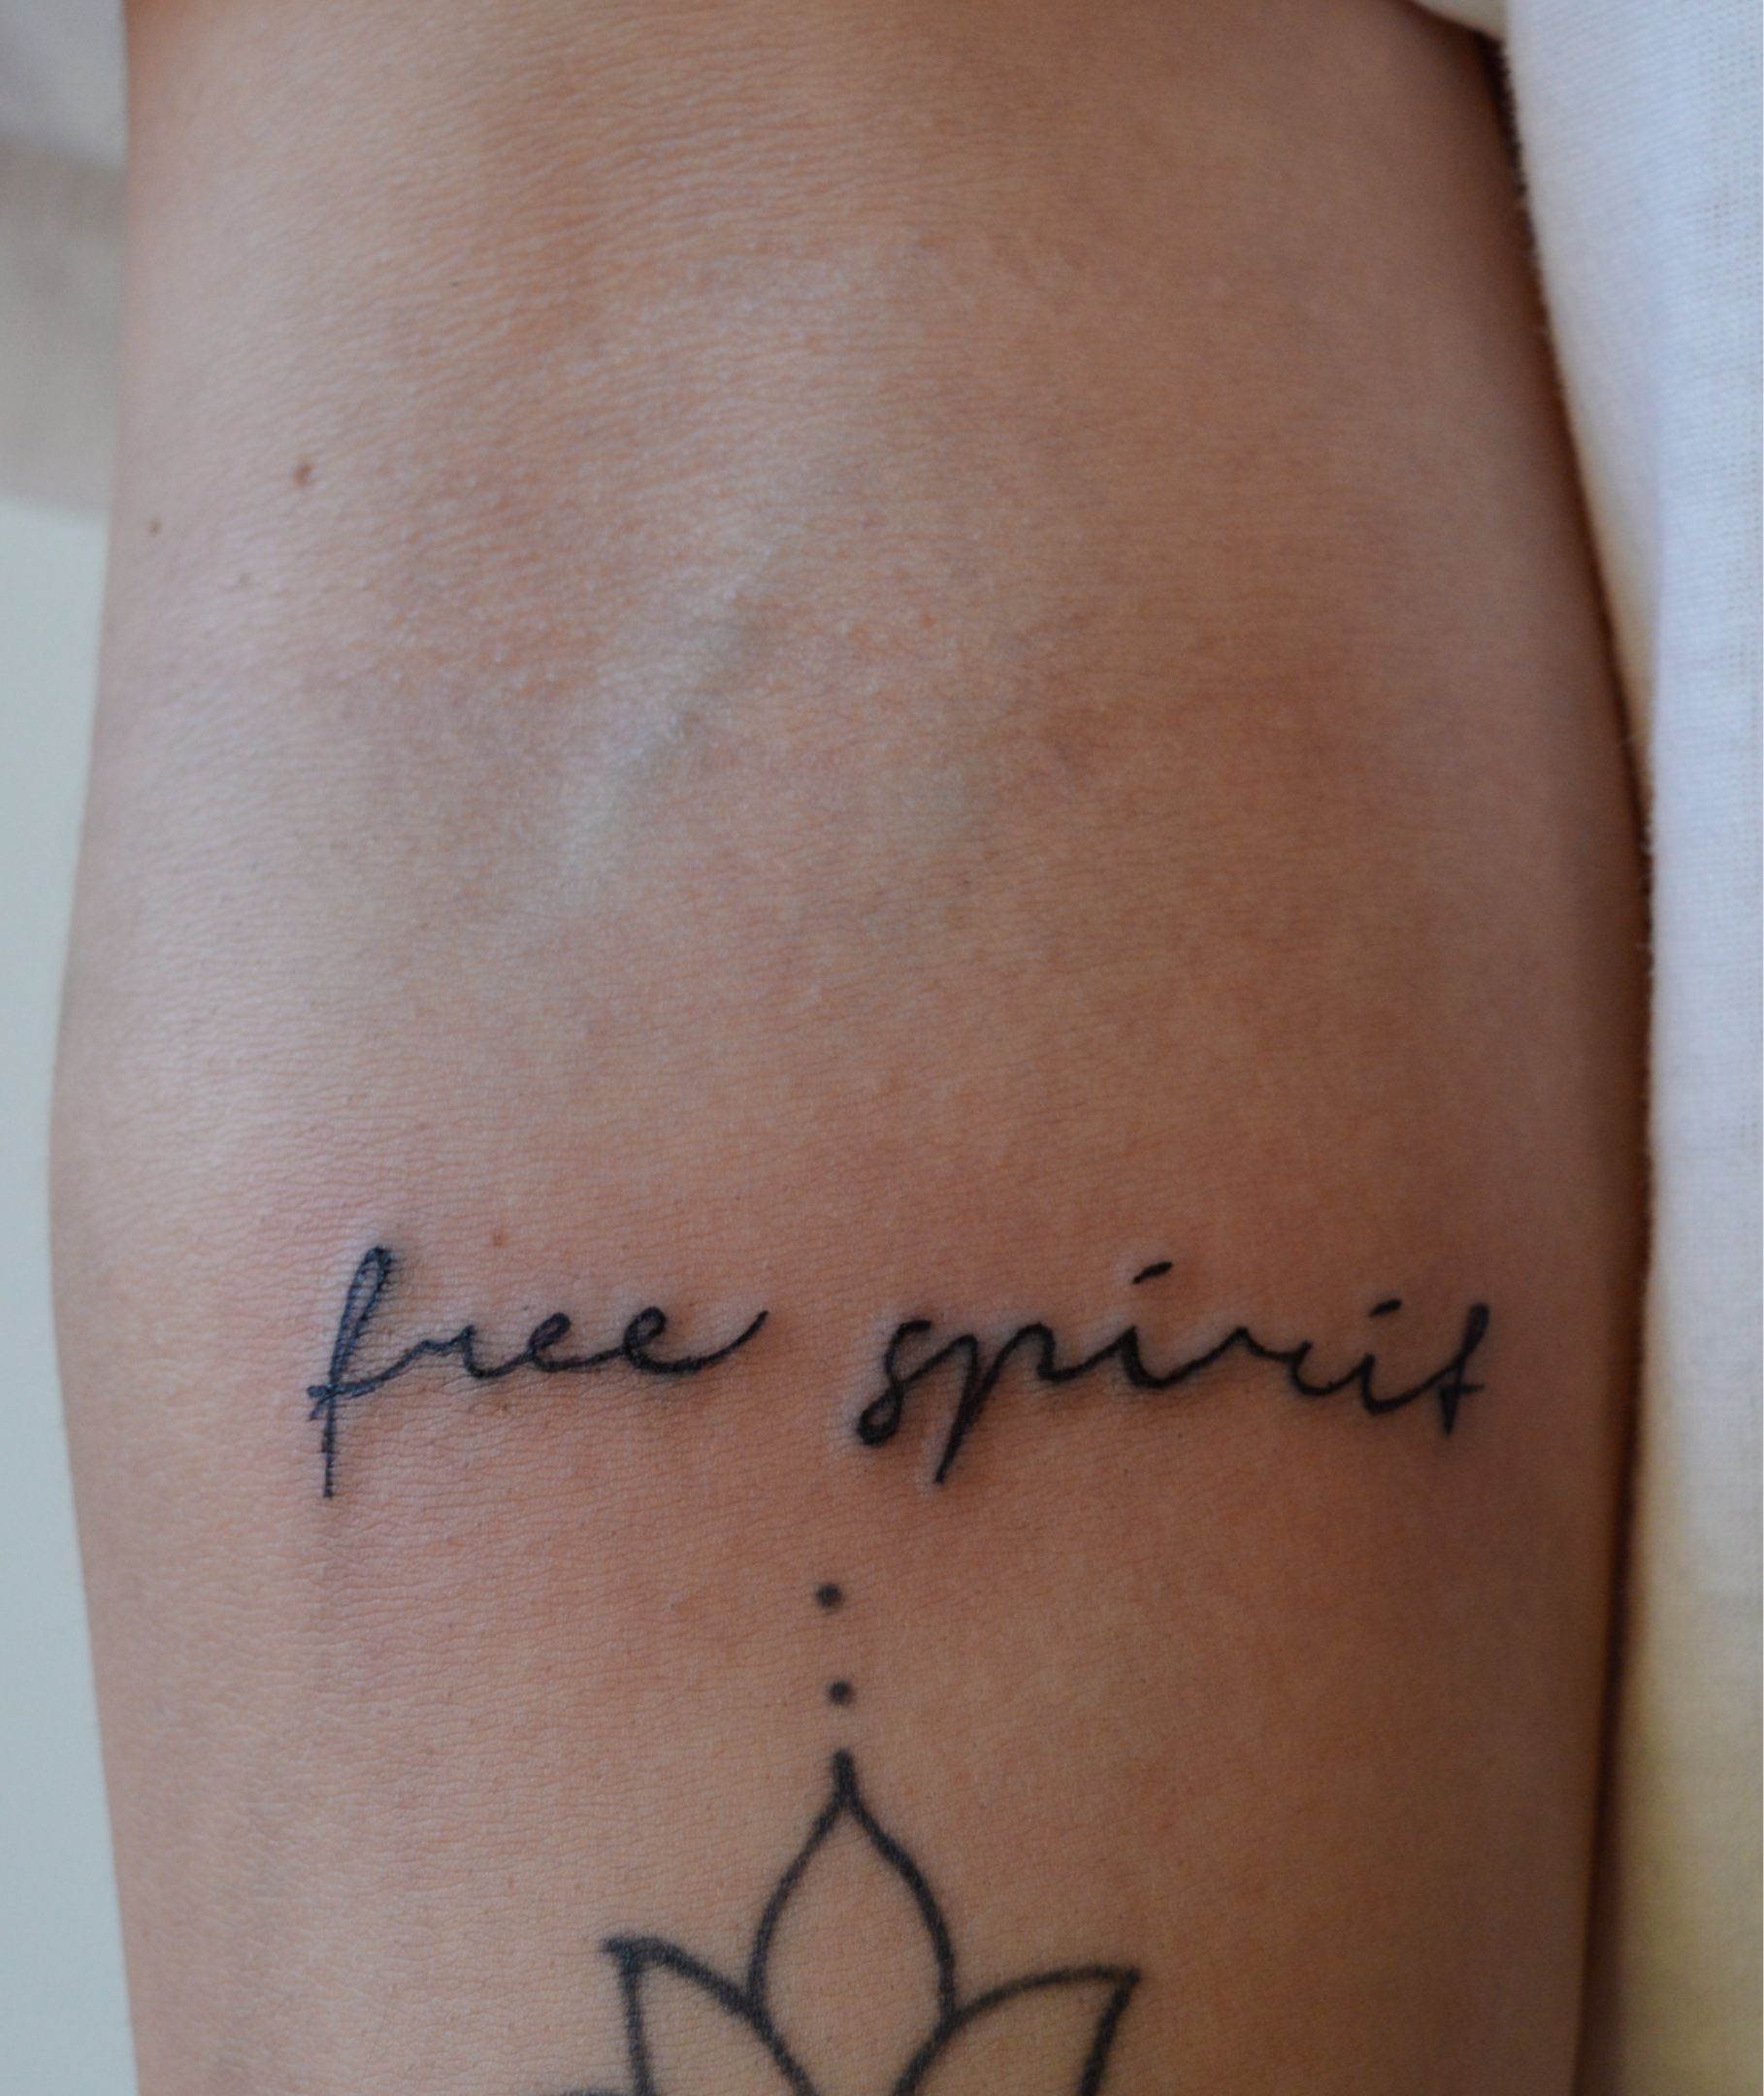 Here Are 11 Beautiful Tattoo Ideas For Those Who Are FreeSpirited  Live  Life On Their Terms